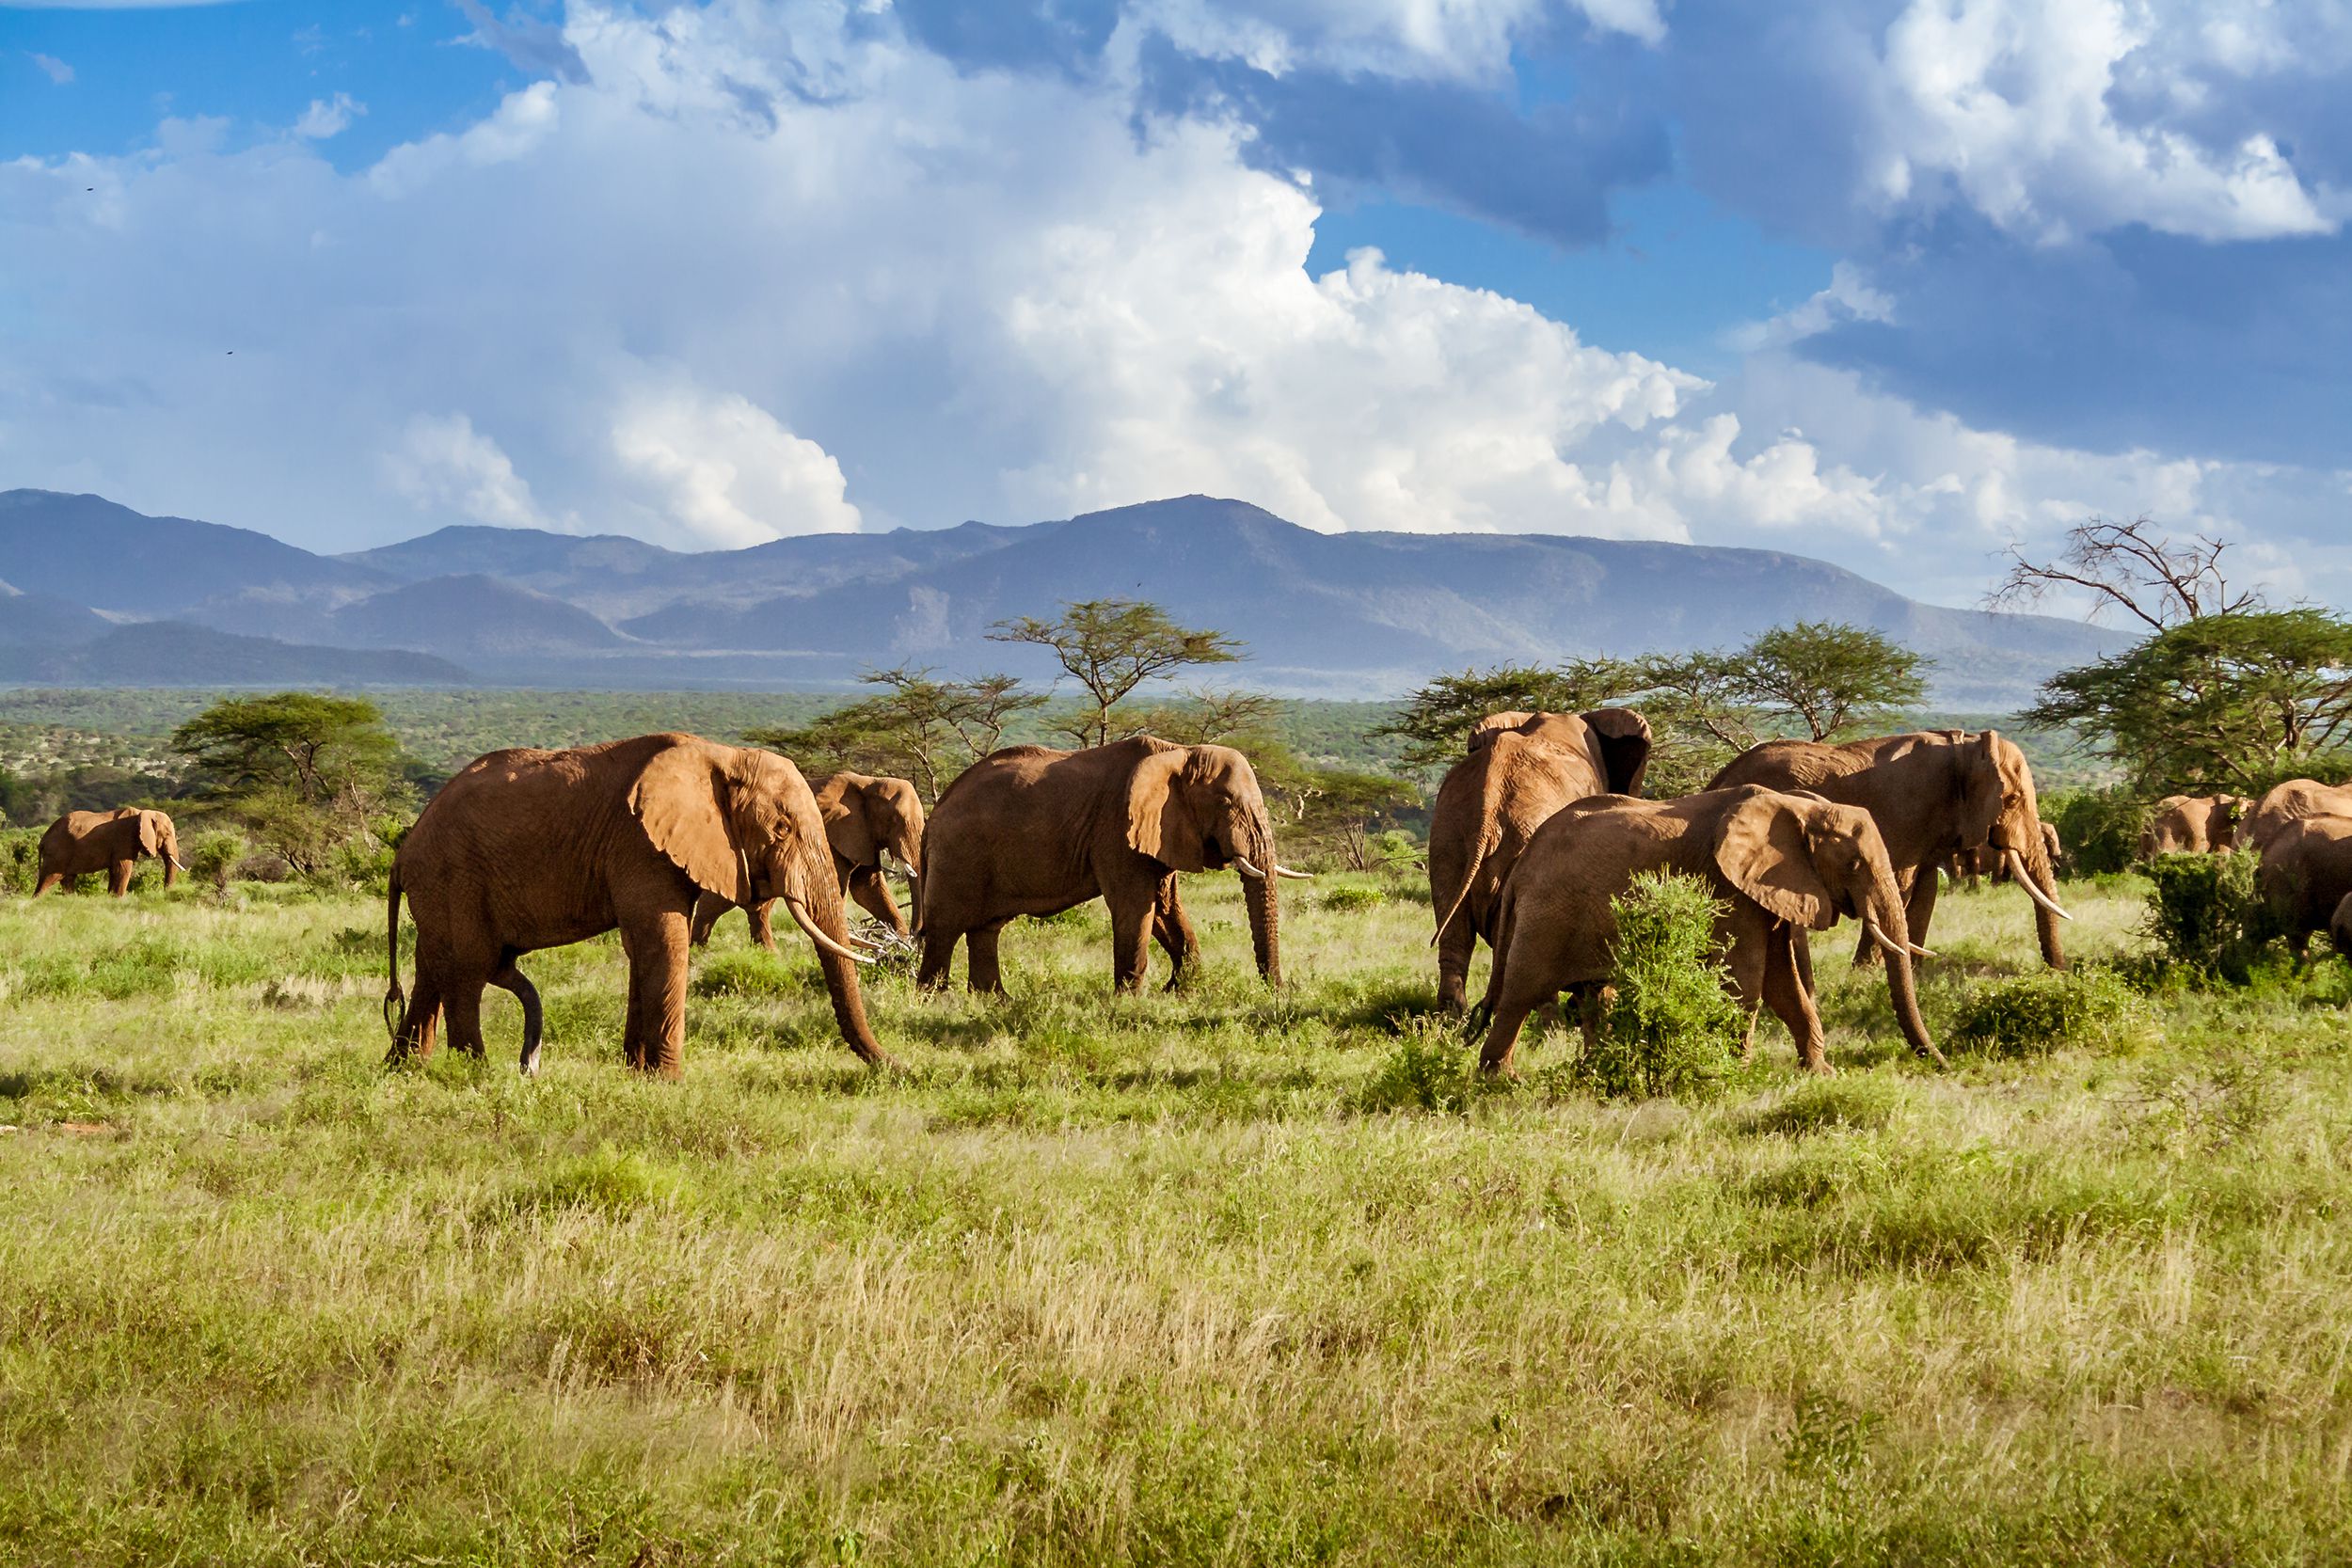 <p>Get up close and personal with incredible wildlife on a bucket-list-worthy safari adventure in South Africa. With most days spent in all-terrain vehicles observing the "<a href="https://www.tripsavvy.com/africas-big-five-safari-animals-1454083">Big Five</a>" roaming the boundless landscapes, excursions are often low impact and popular with budget-conscious boomers. Book a fully guided safari package through <a href="https://www.krugerpark.co.za">Kruger National Park</a>, one of Africa’s largest game reserves, or another affordable day or multi-day <a href="https://www.africanbudgetsafaris.com/budget-safaris">Cape Town safari adventure</a>. Other attractions include vineyard tours, beach getaways, and a tram ride up Table Mountain.</p><p><b>Related:</b> <a href="https://blog.cheapism.com/wild-animal-parks/">21 Places to Safely See Wild Animals Up Close</a></p>